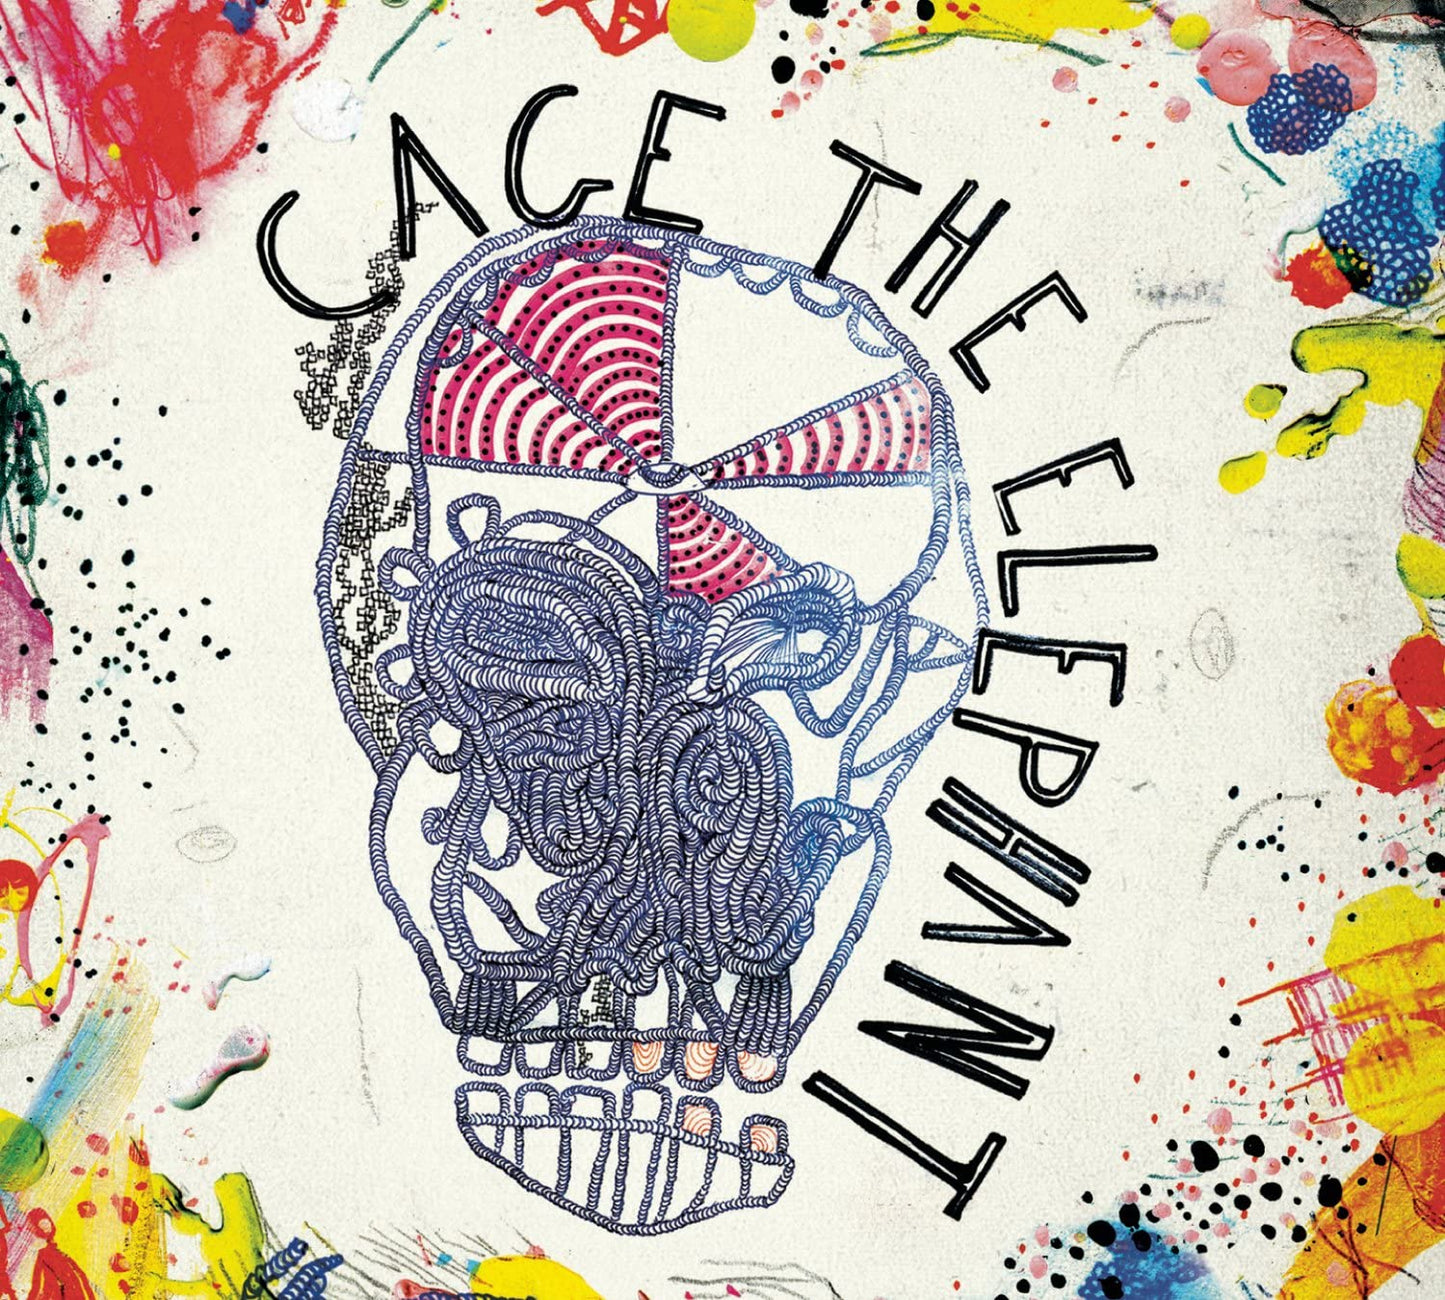 LP - Cage the Elephant - S/T